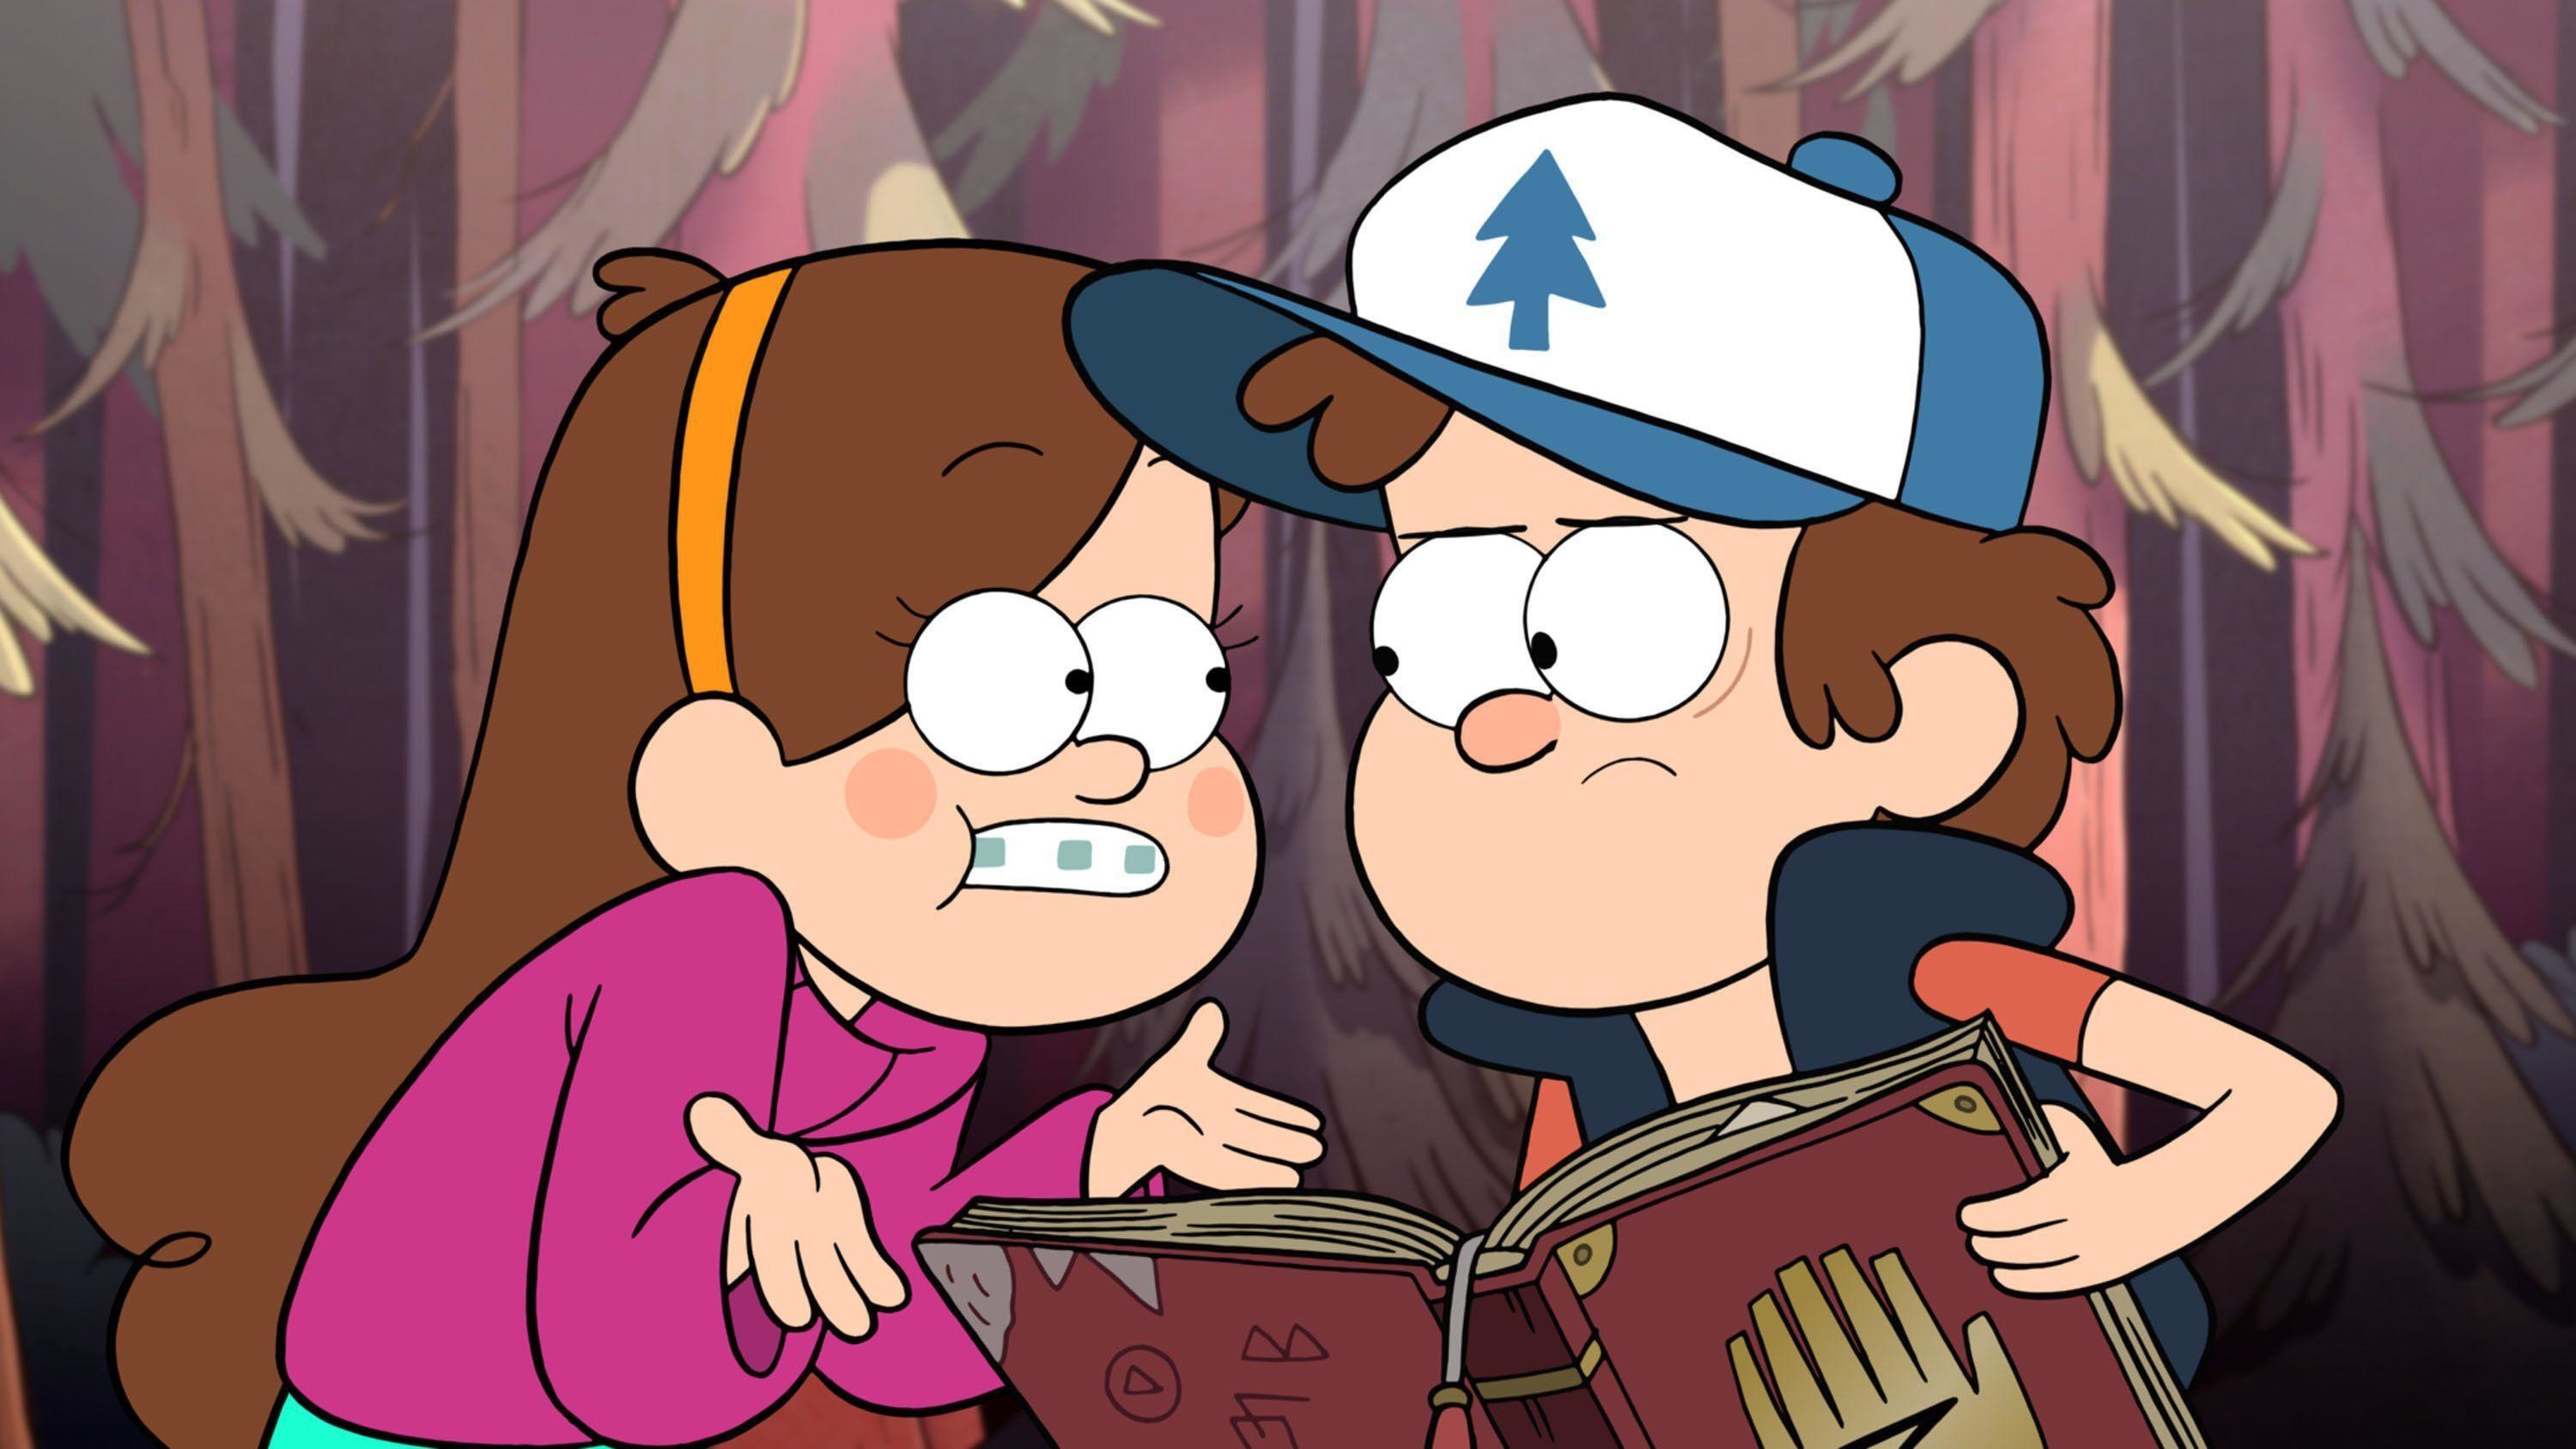 Mabel and Dipper investigate a mysterious book in &quot;Gravity Falls&quot;